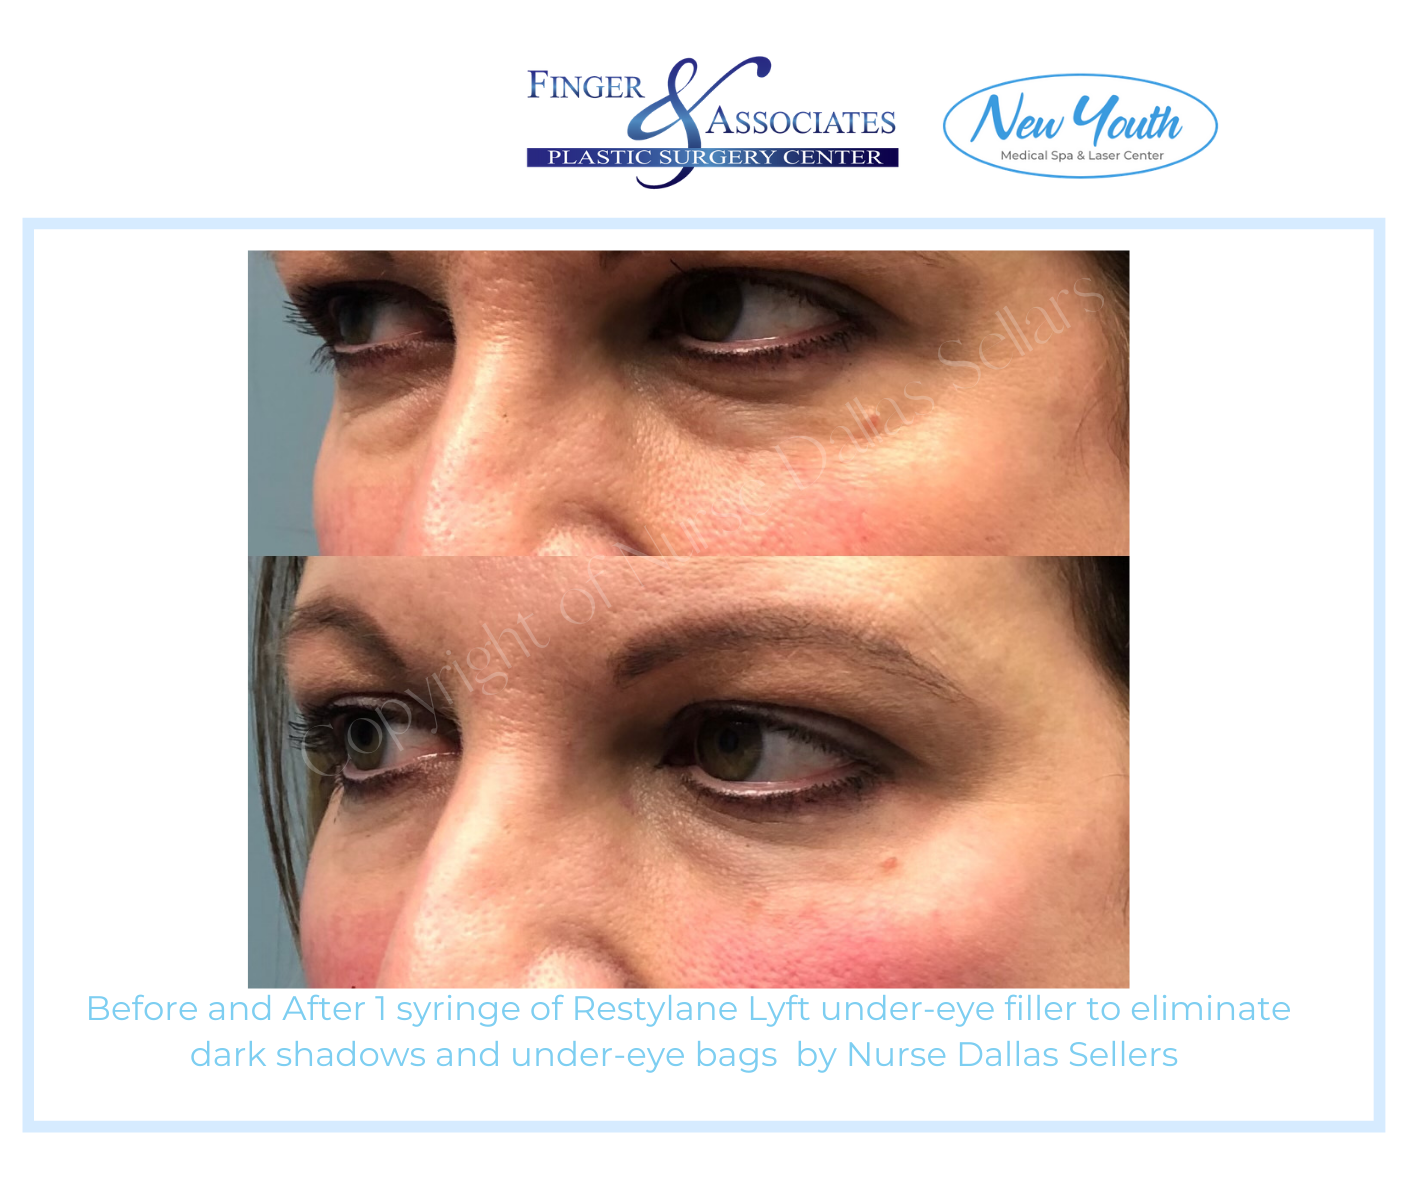 Before and after Restylane Lyft under Eye filler by Nurse Injector Dallas Sellars